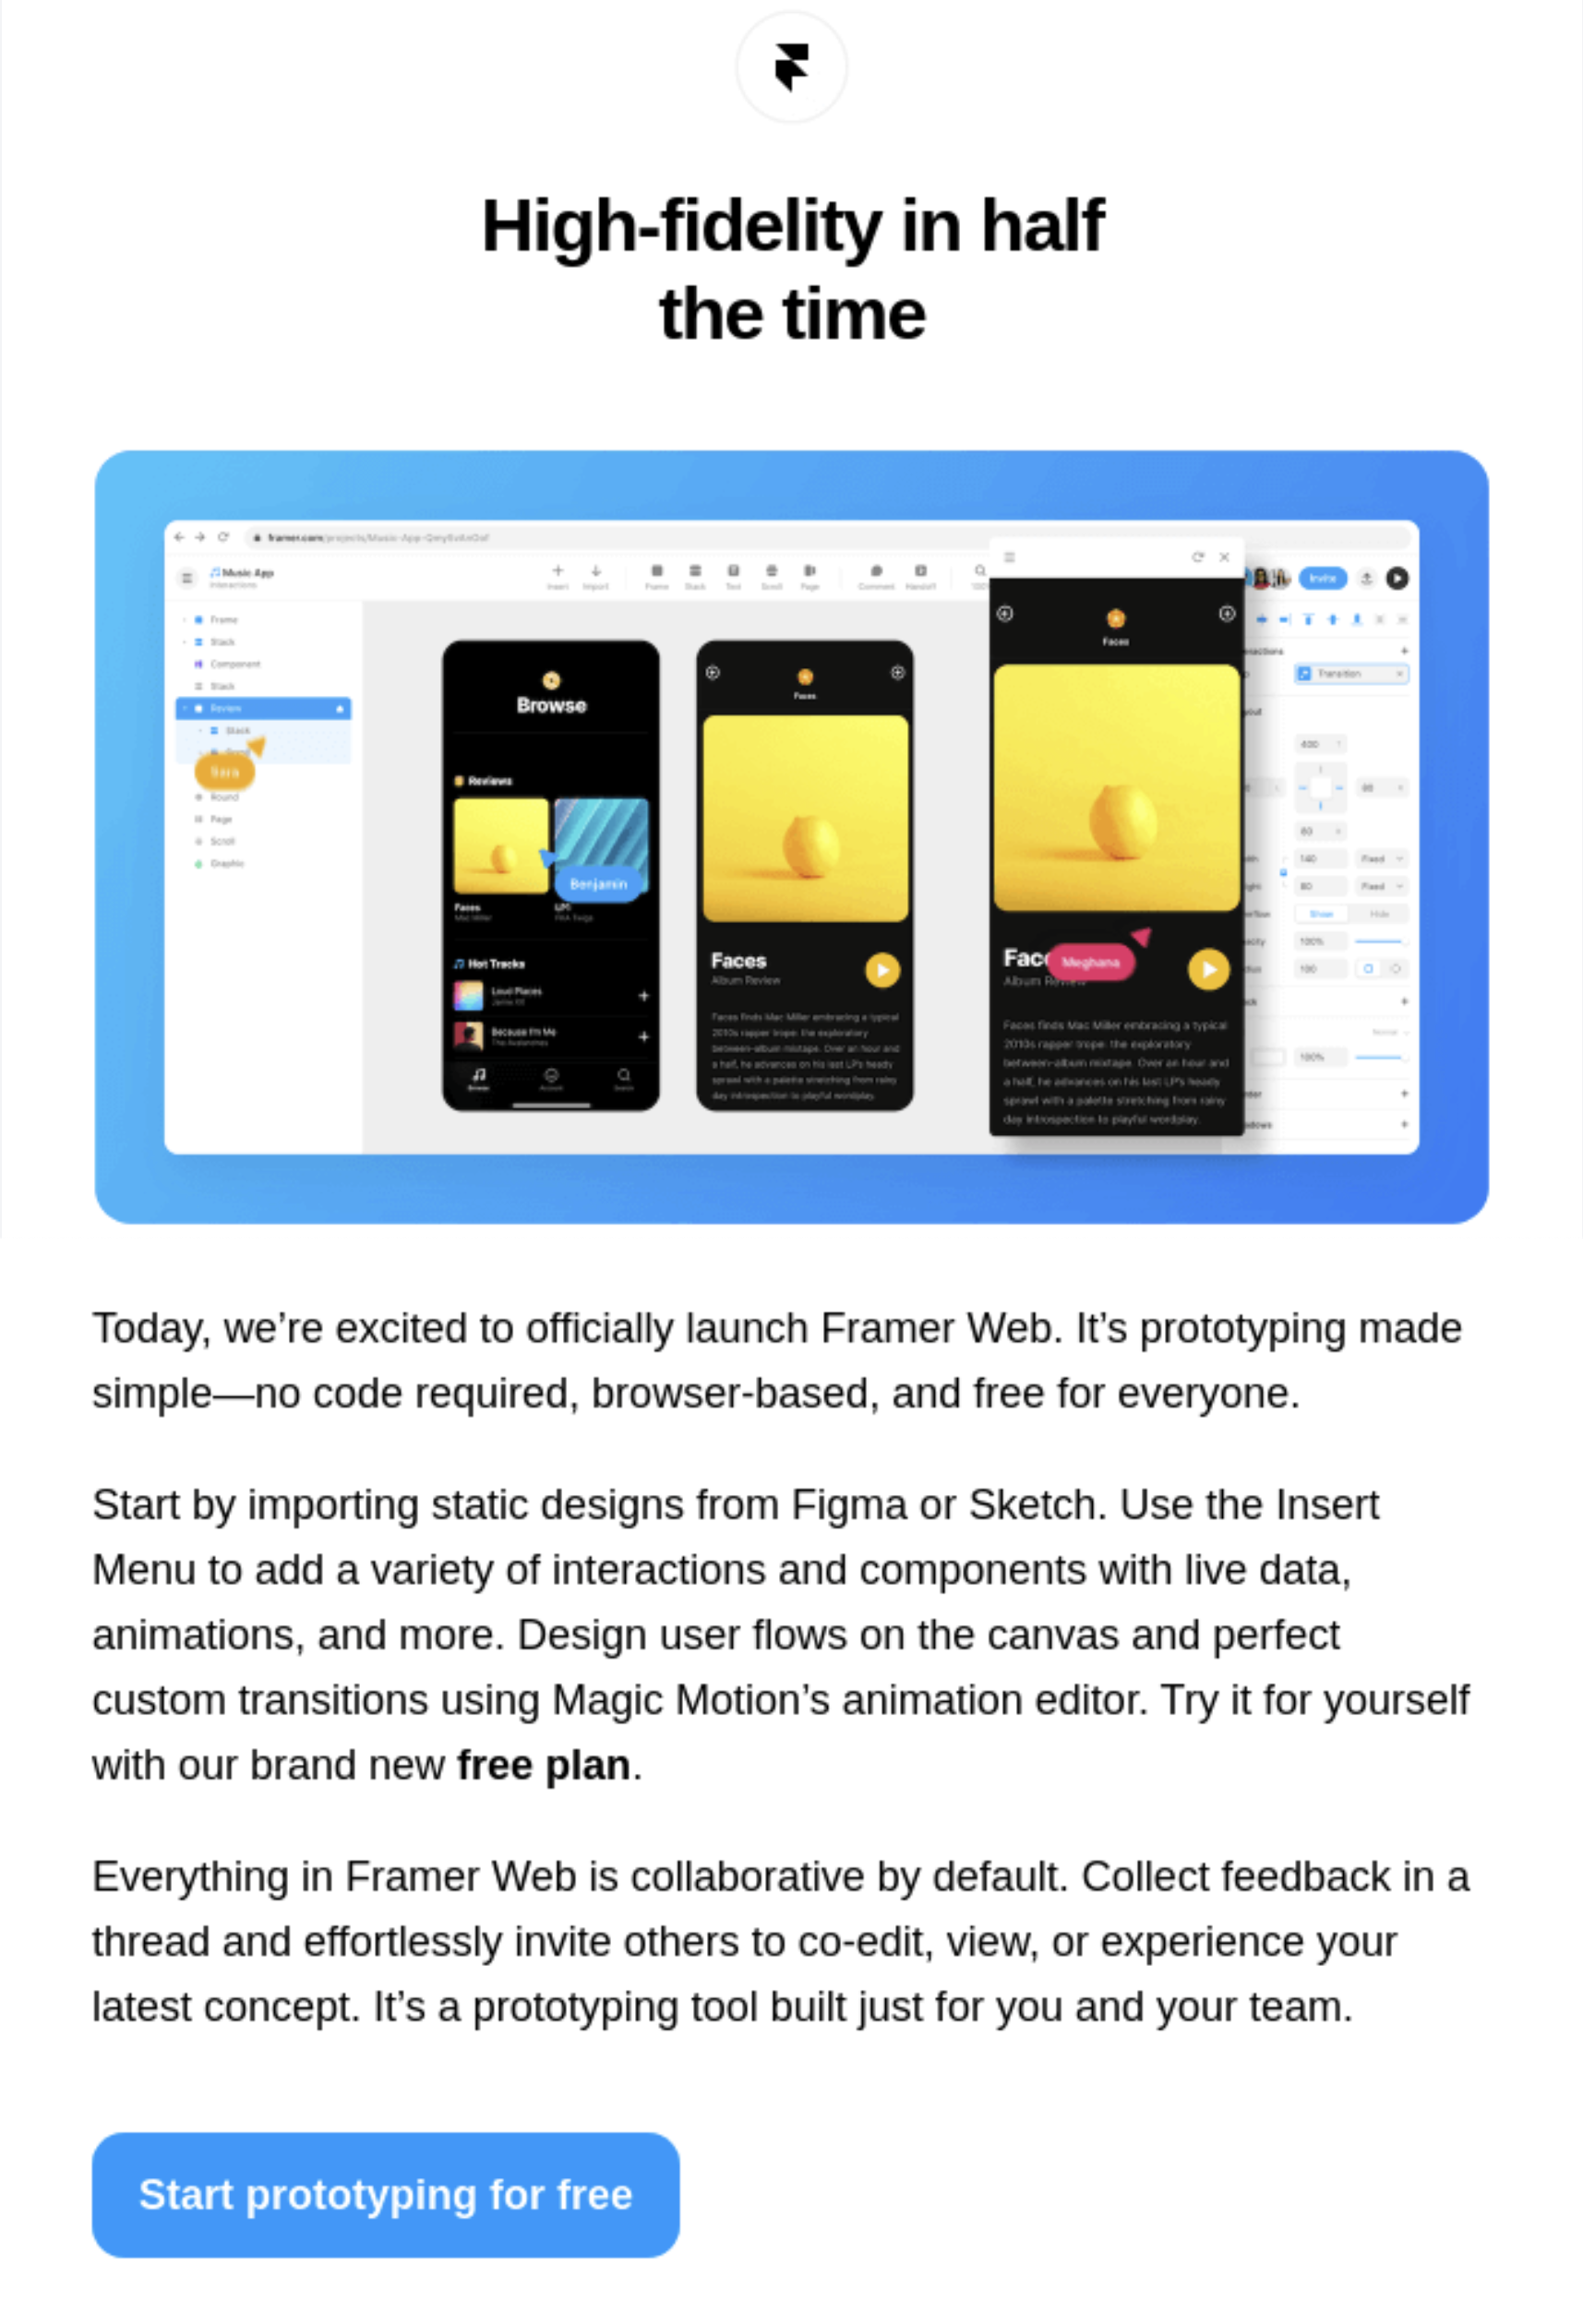 GIFs in SaaS Emails: Screenshot of Framer's product launch email